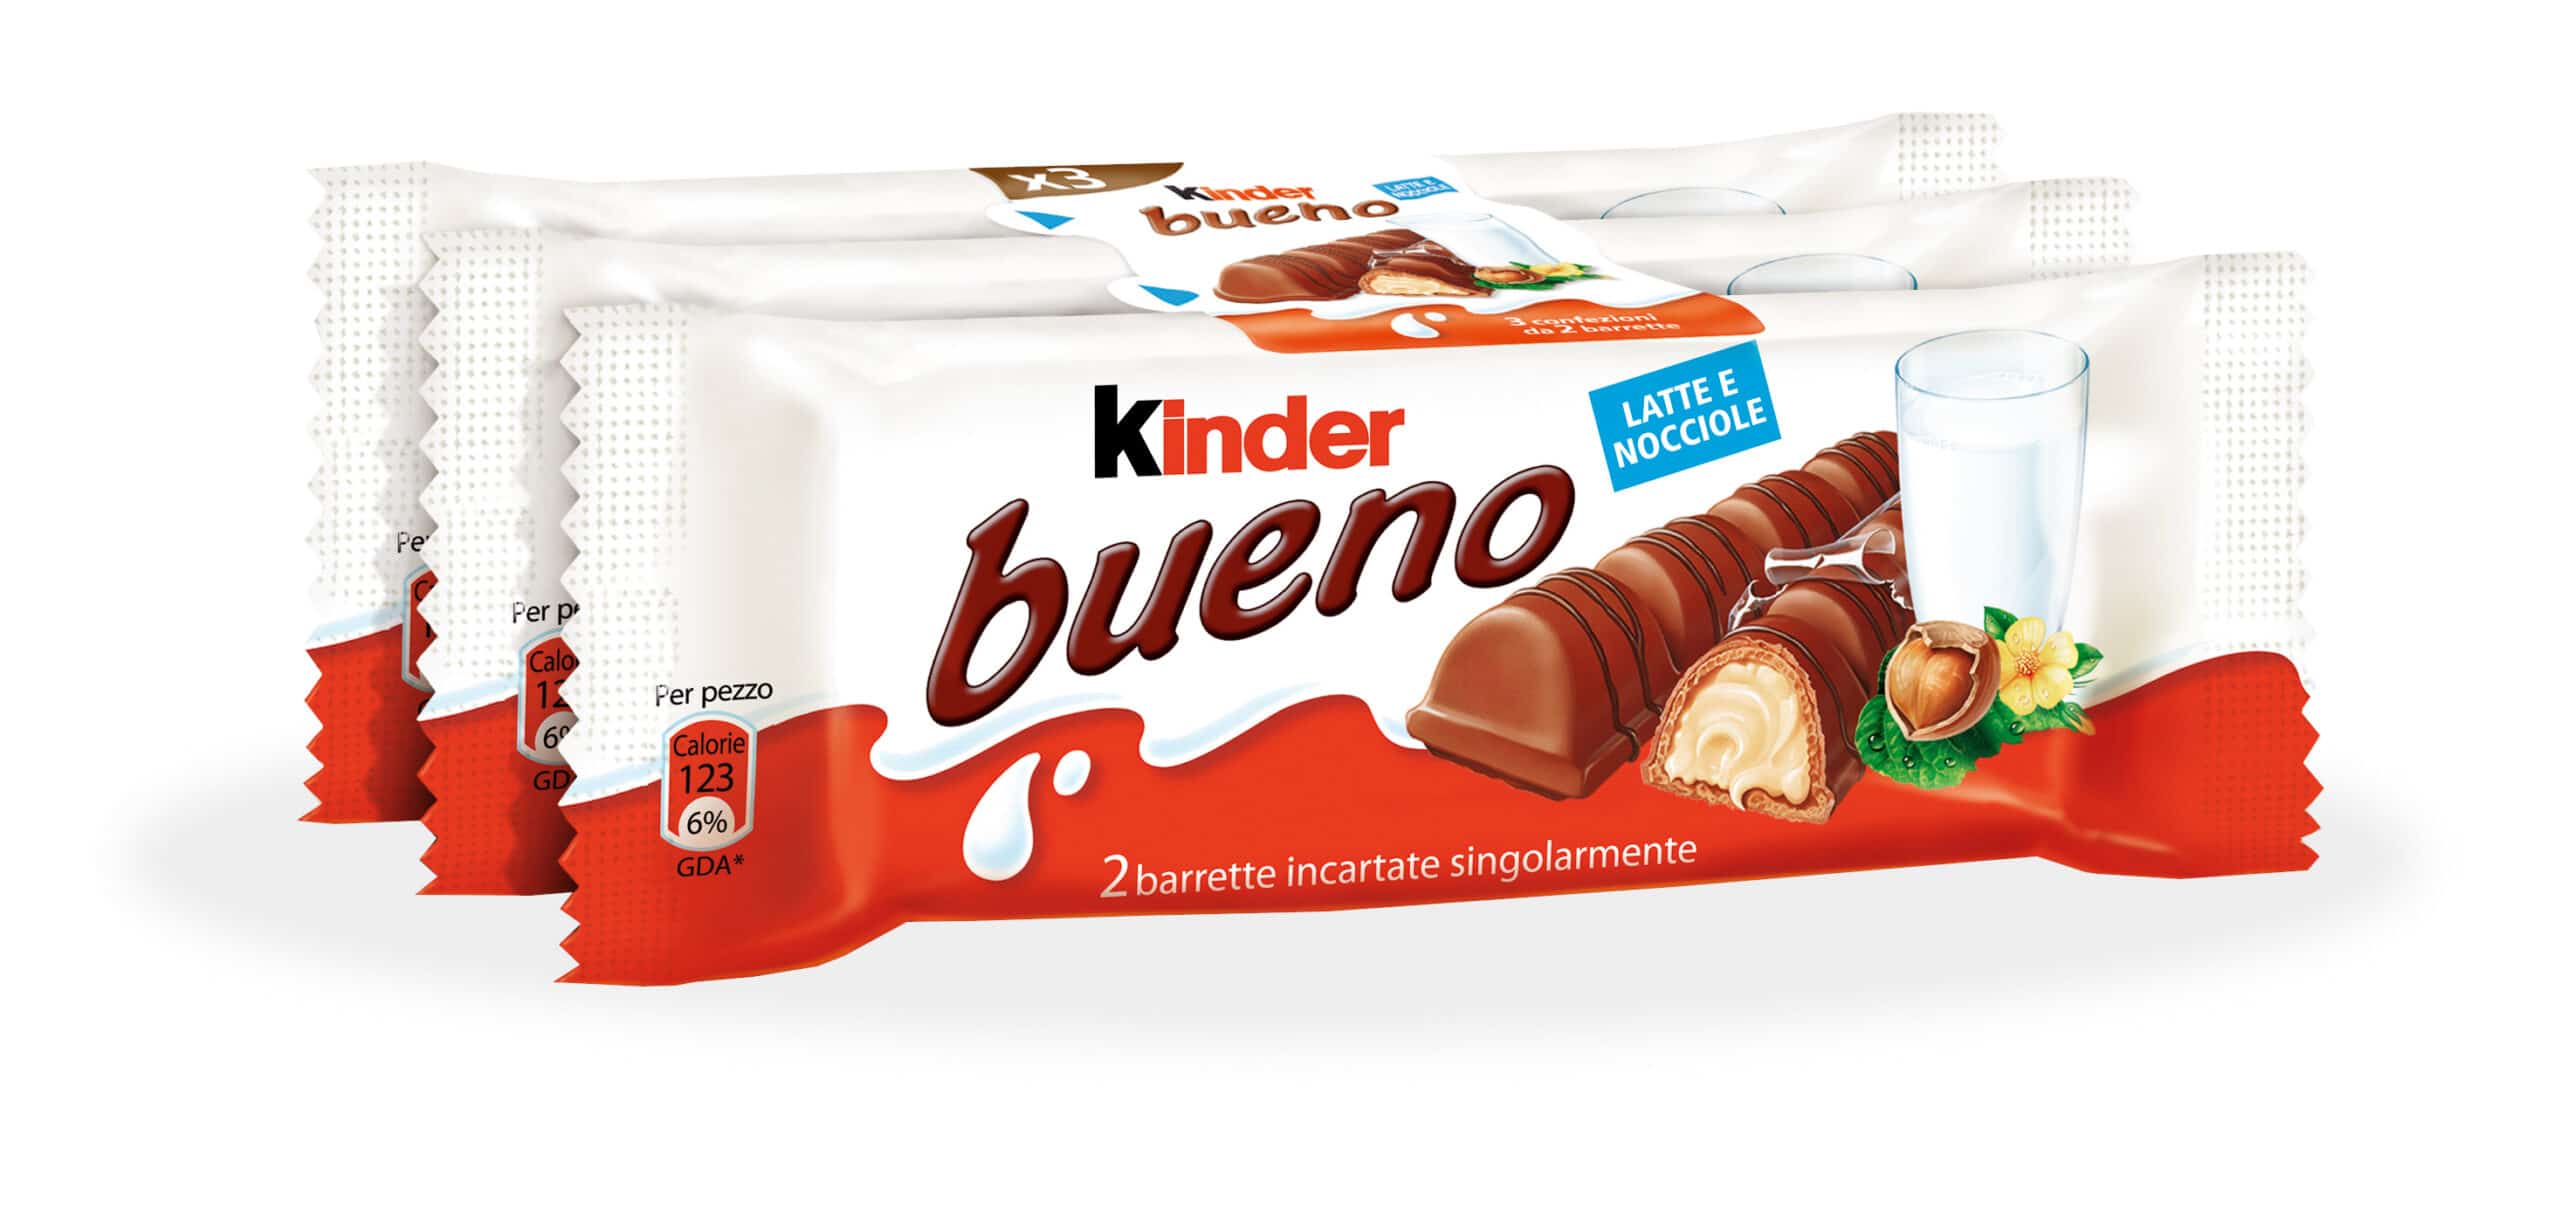 Ferrero: Kinder Bueno chocolate 3pz Terra from Wide Italy” World – “Imported